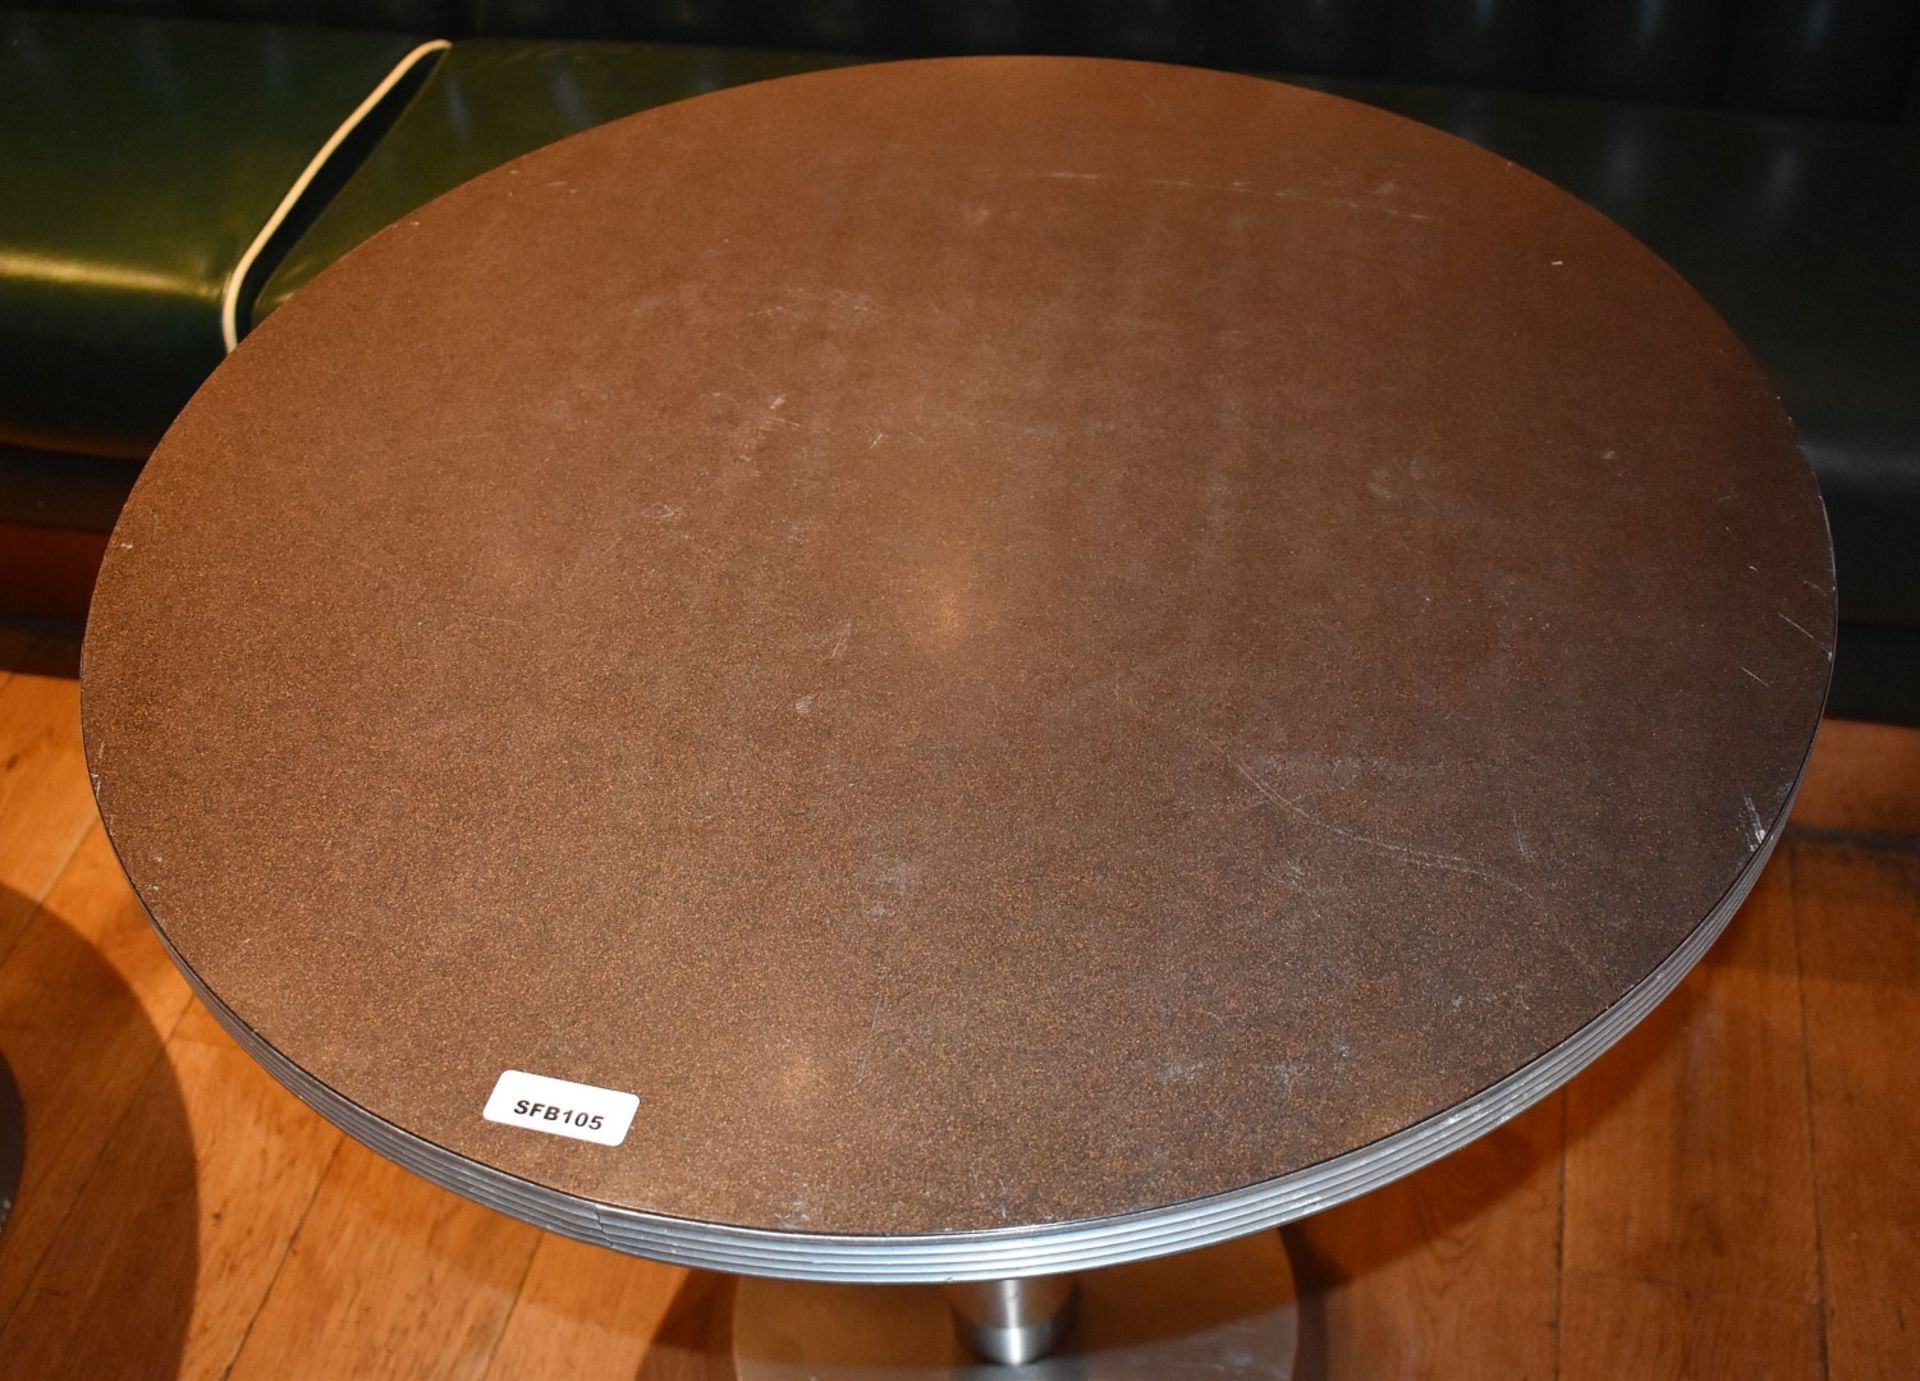 1 x Round Restaurant Dining Table Featuring Brushed Metal Edging and Base - Dimensions: ⌀76 x H76cm - Image 2 of 2